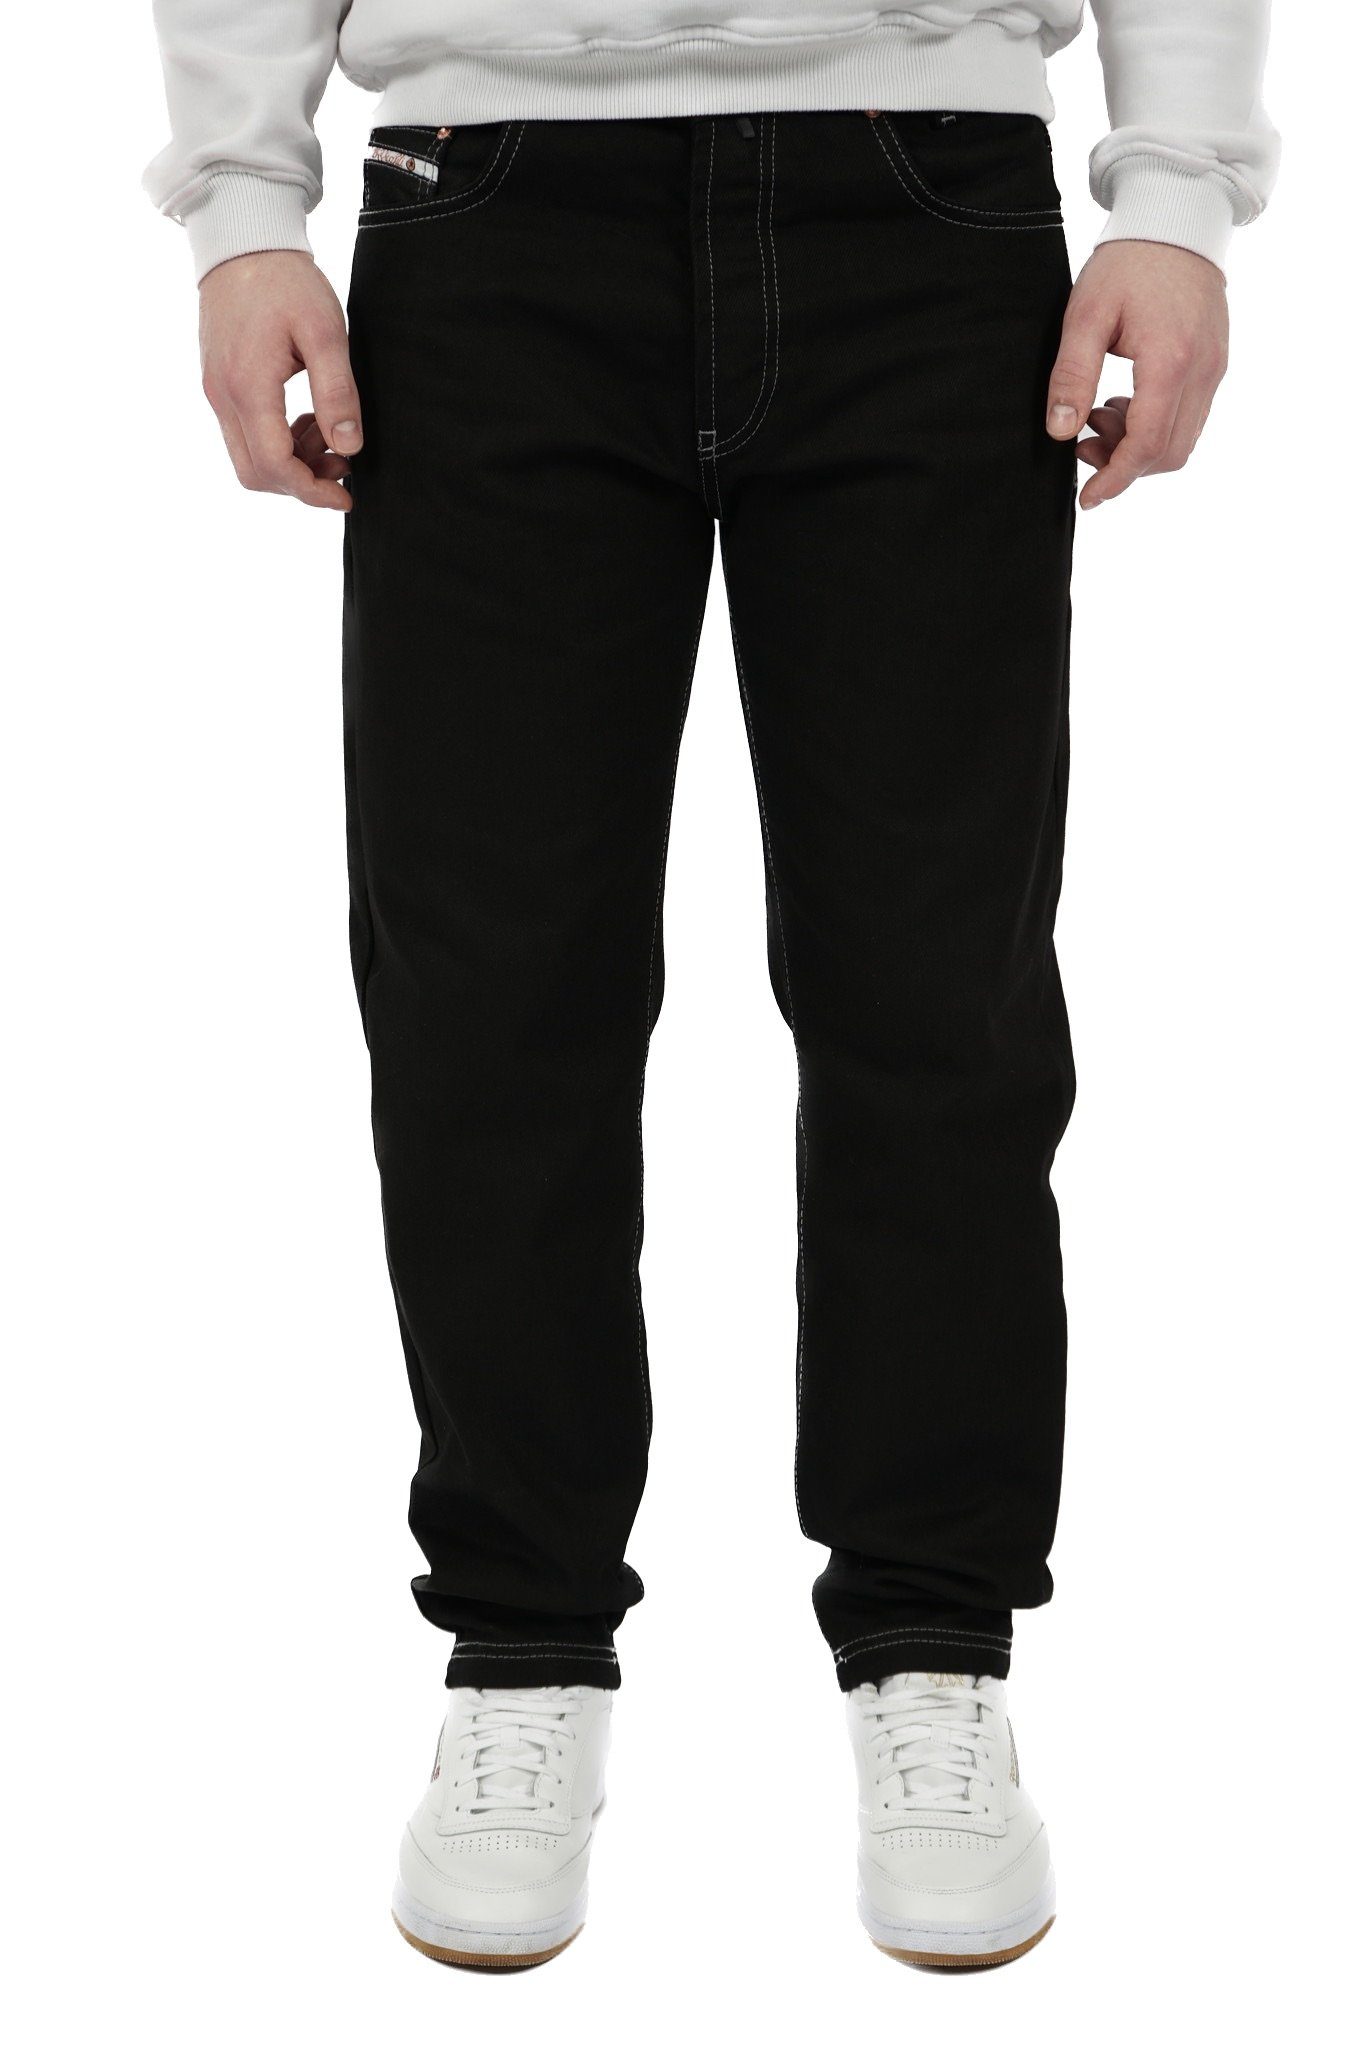 PICALDI Jeans Tapered-fit-Jeans Zicco 473 Relaxed Fit, Karottenschnitt Hose Platin Black